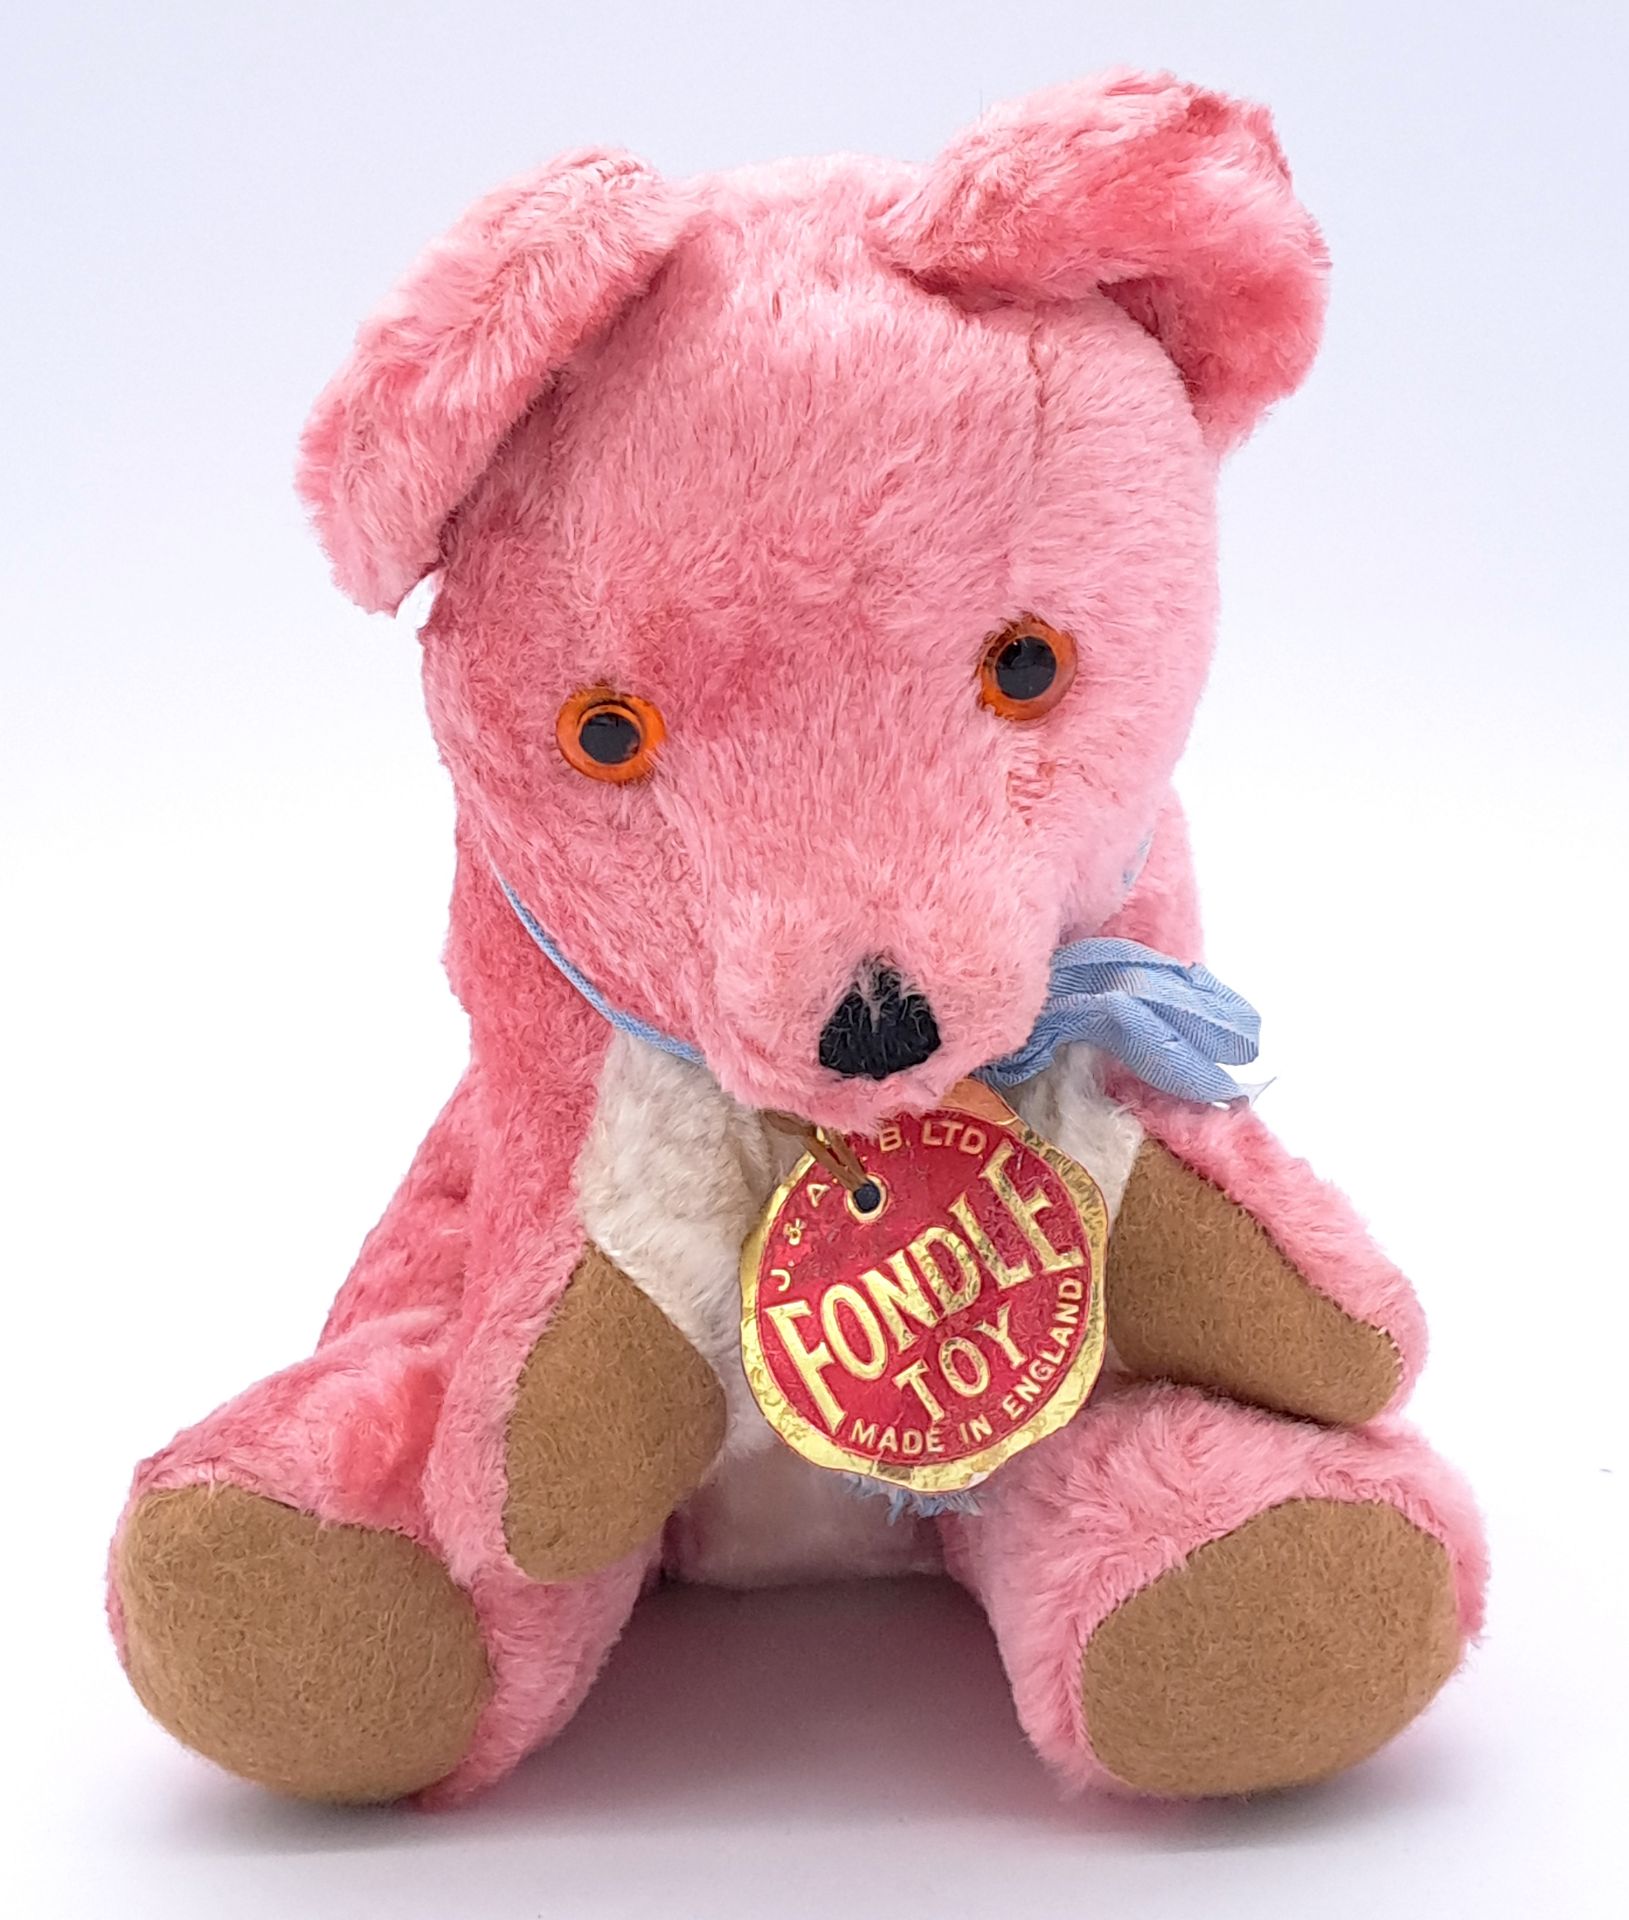 Fondle Toys Ting-a-Ling bear with original paper tag